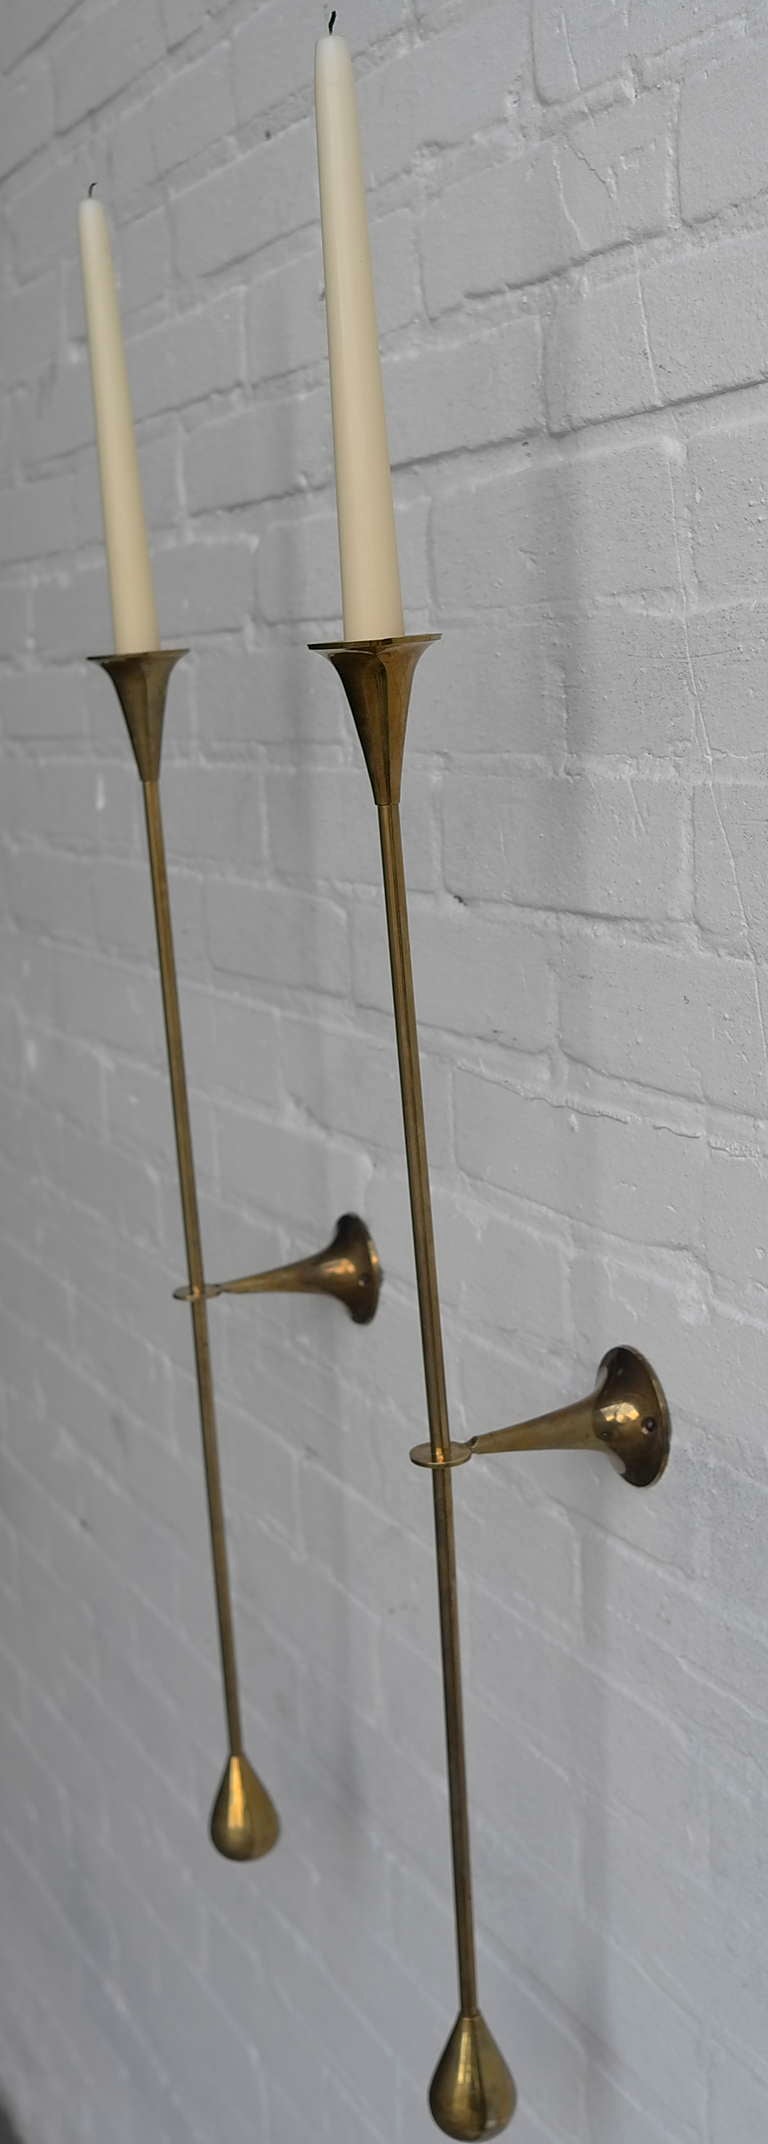 Fine Pair of Large Brass Candle Wall Sconces 1